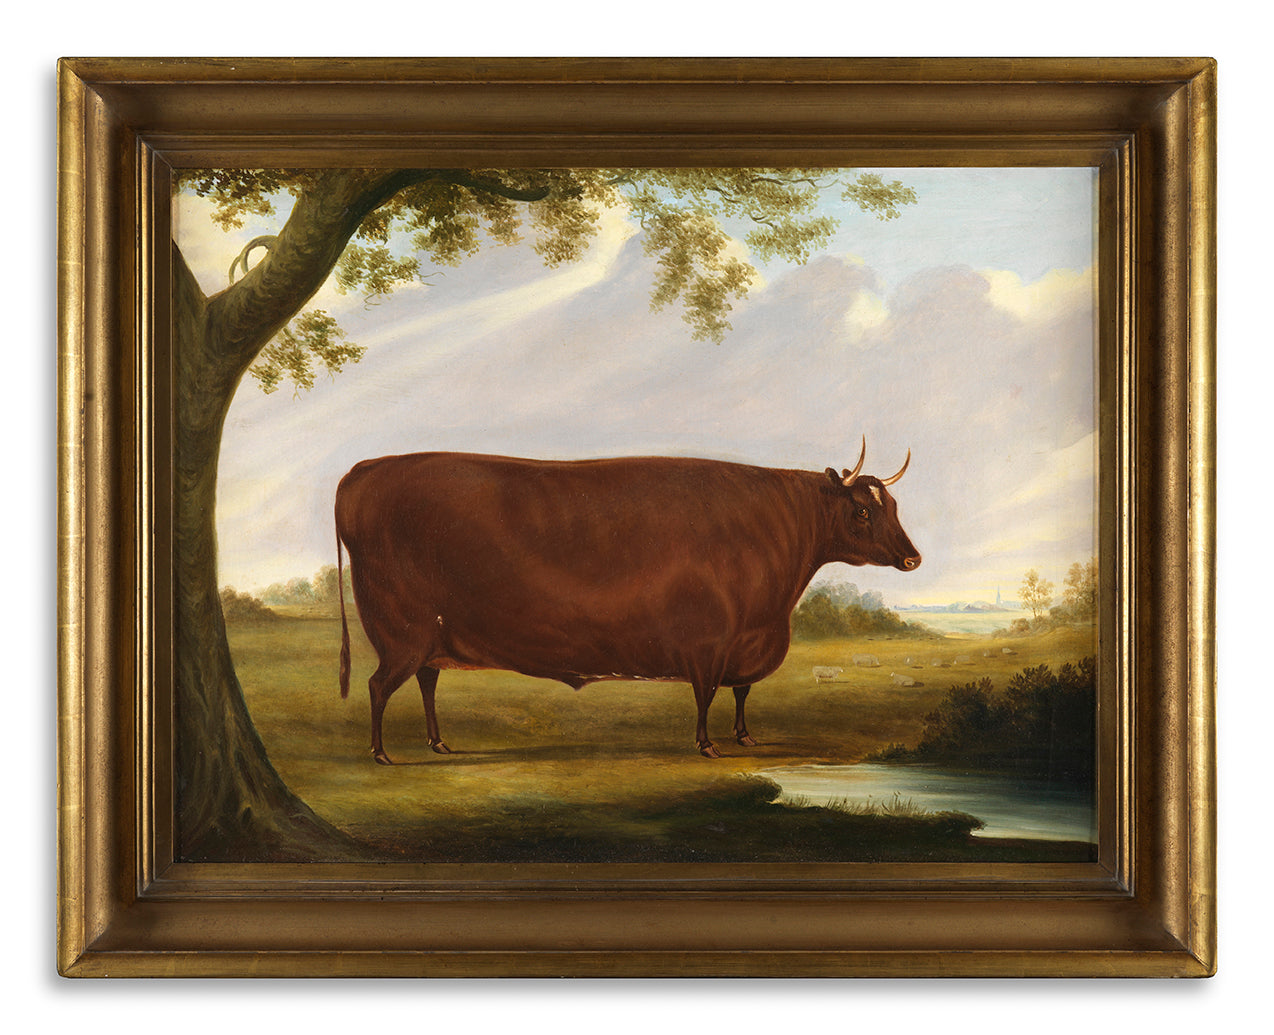 Depicting a Large Square Brown Bull in a Stylised Landscape